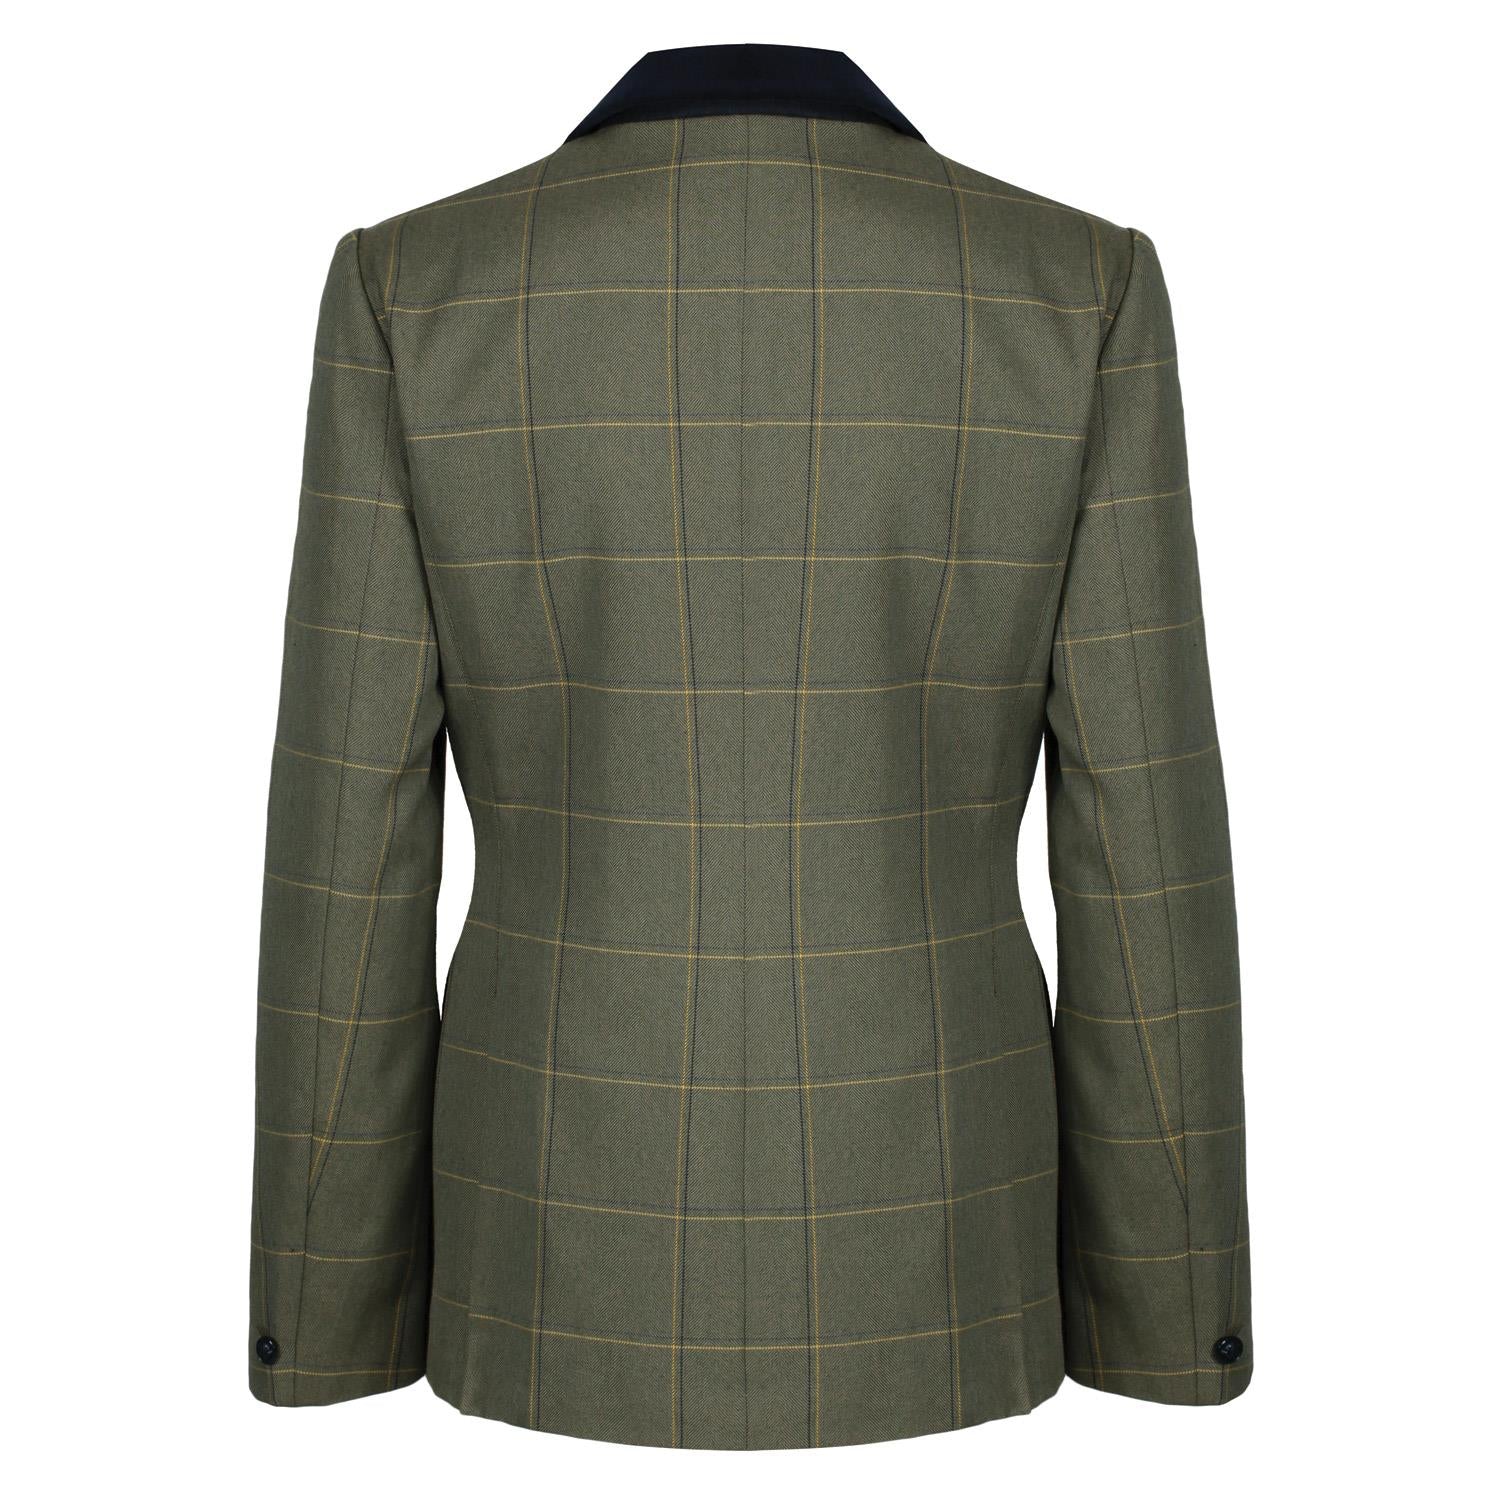 Equetech Kensworth Deluxe Tweed Riding Jacket - Just Horse Riders